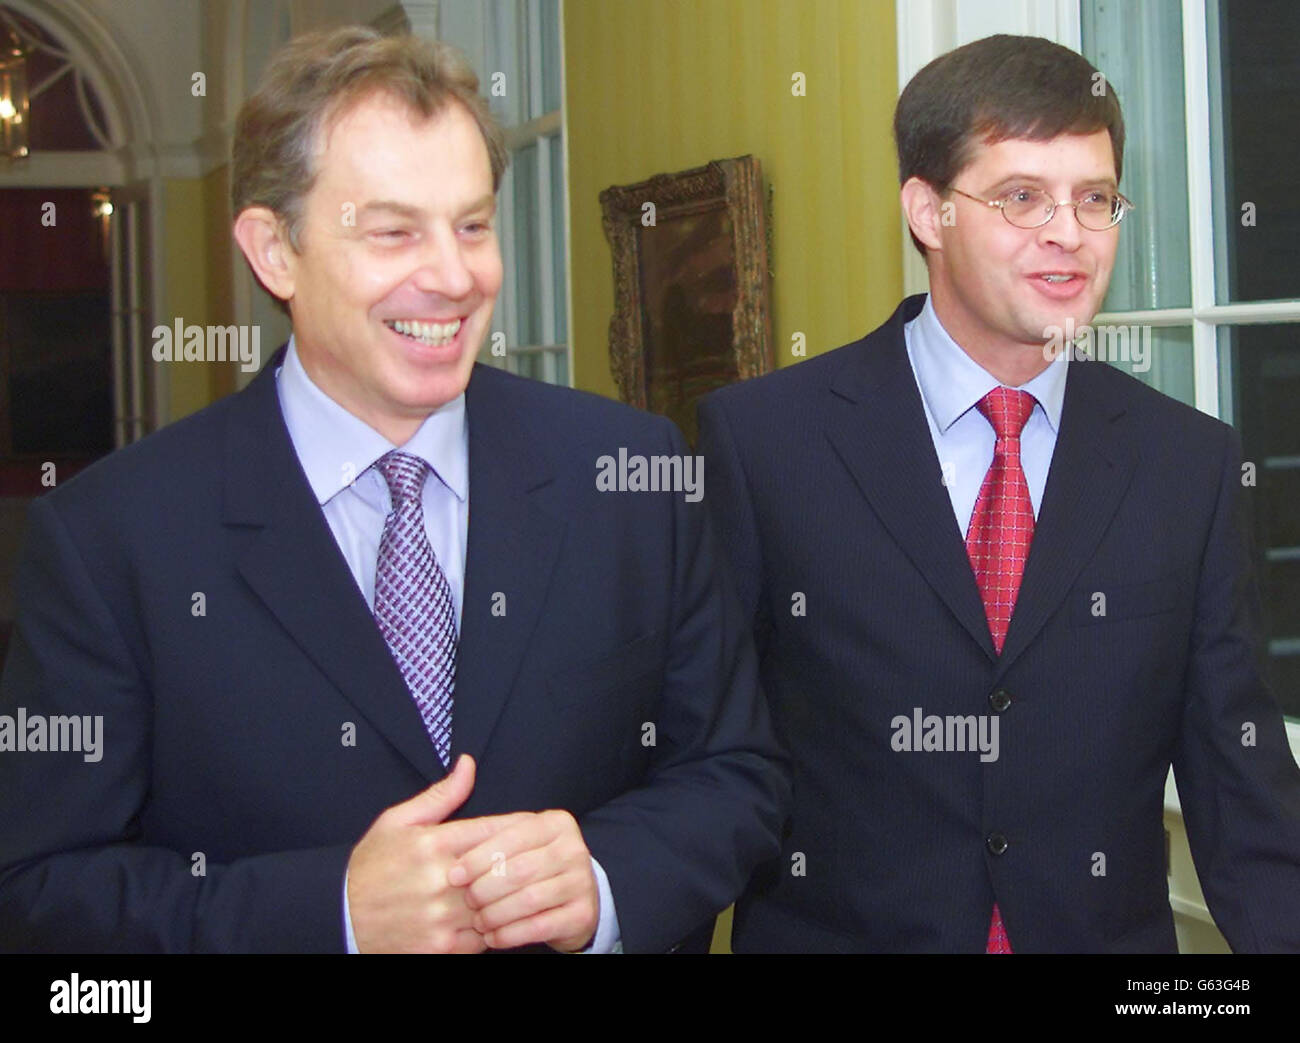 British Prime Minister Tony Blair (left) jokes with Dutch caretaker Prime Minister Jan Peter Balkenende at No.10 Downing Street. * Tony Blair called for agreement on a United Nations resolution over Iraq and underlined the seriousness of dealing with Saddam Hussein's weapons of mass destruction programme. Stock Photo